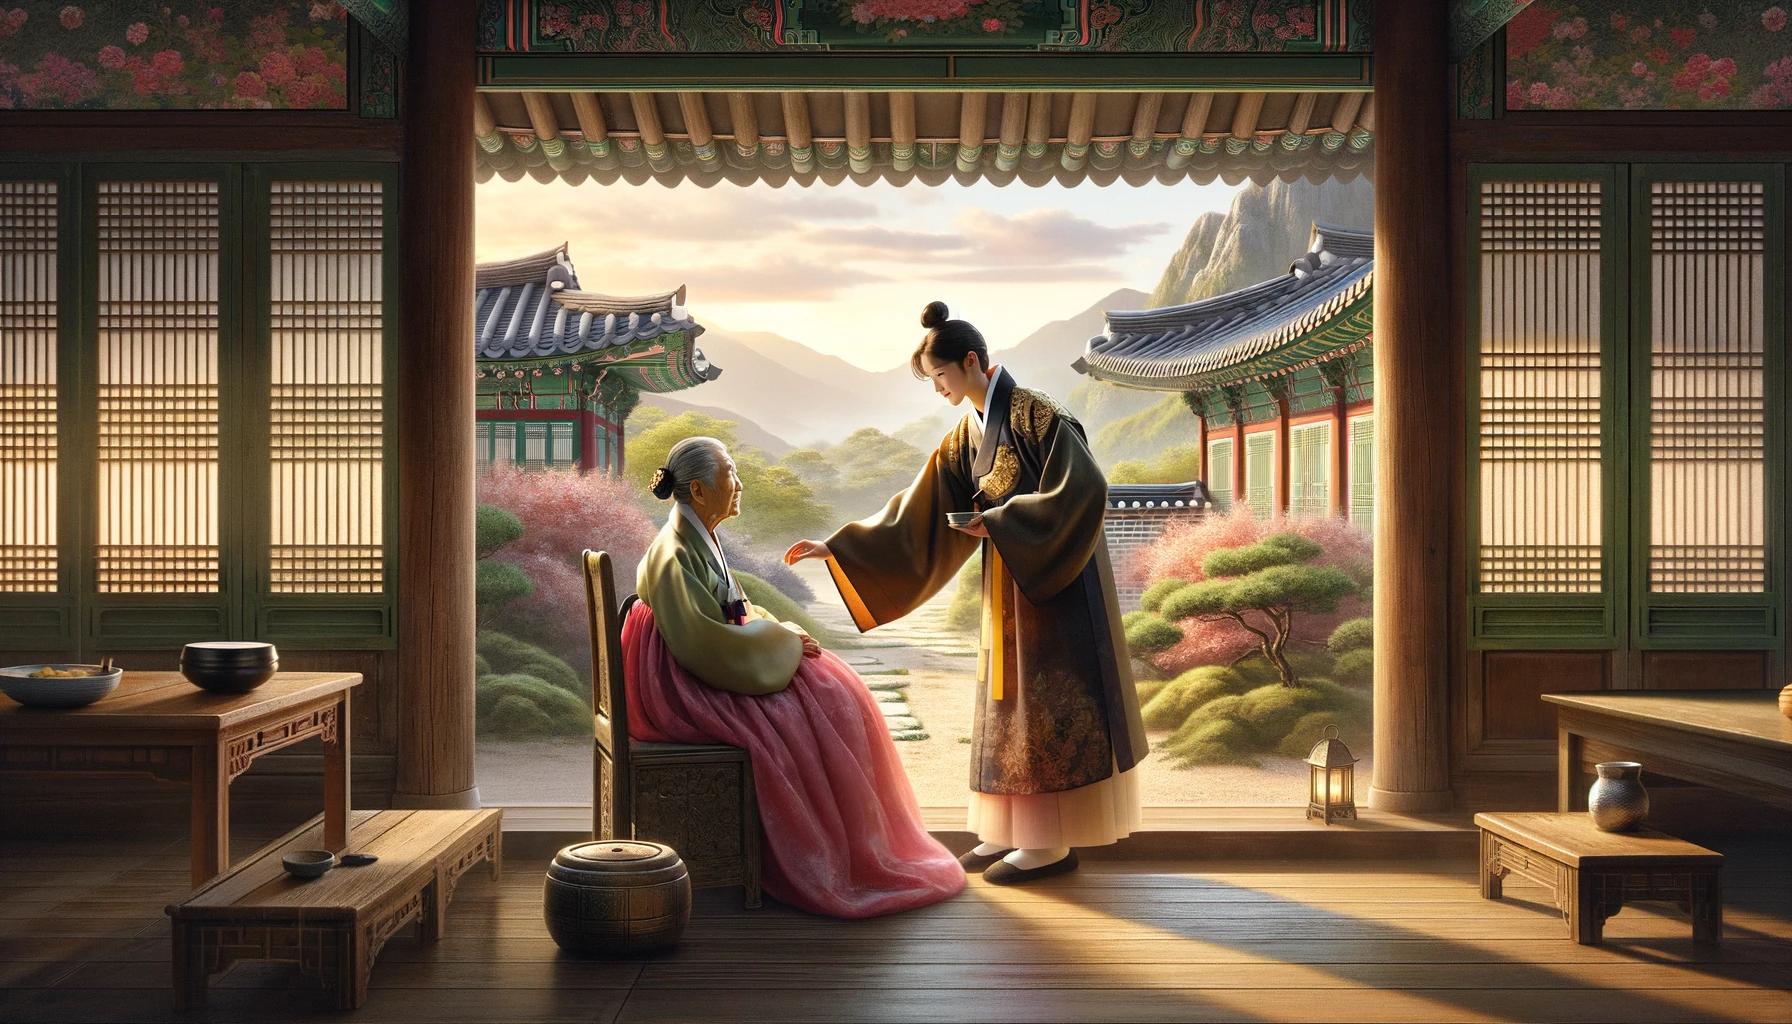 Confucianism In Korea was philosophical, ethical system, a set of beliefs, and a way of life that shaped people's social, political, and cultural values.